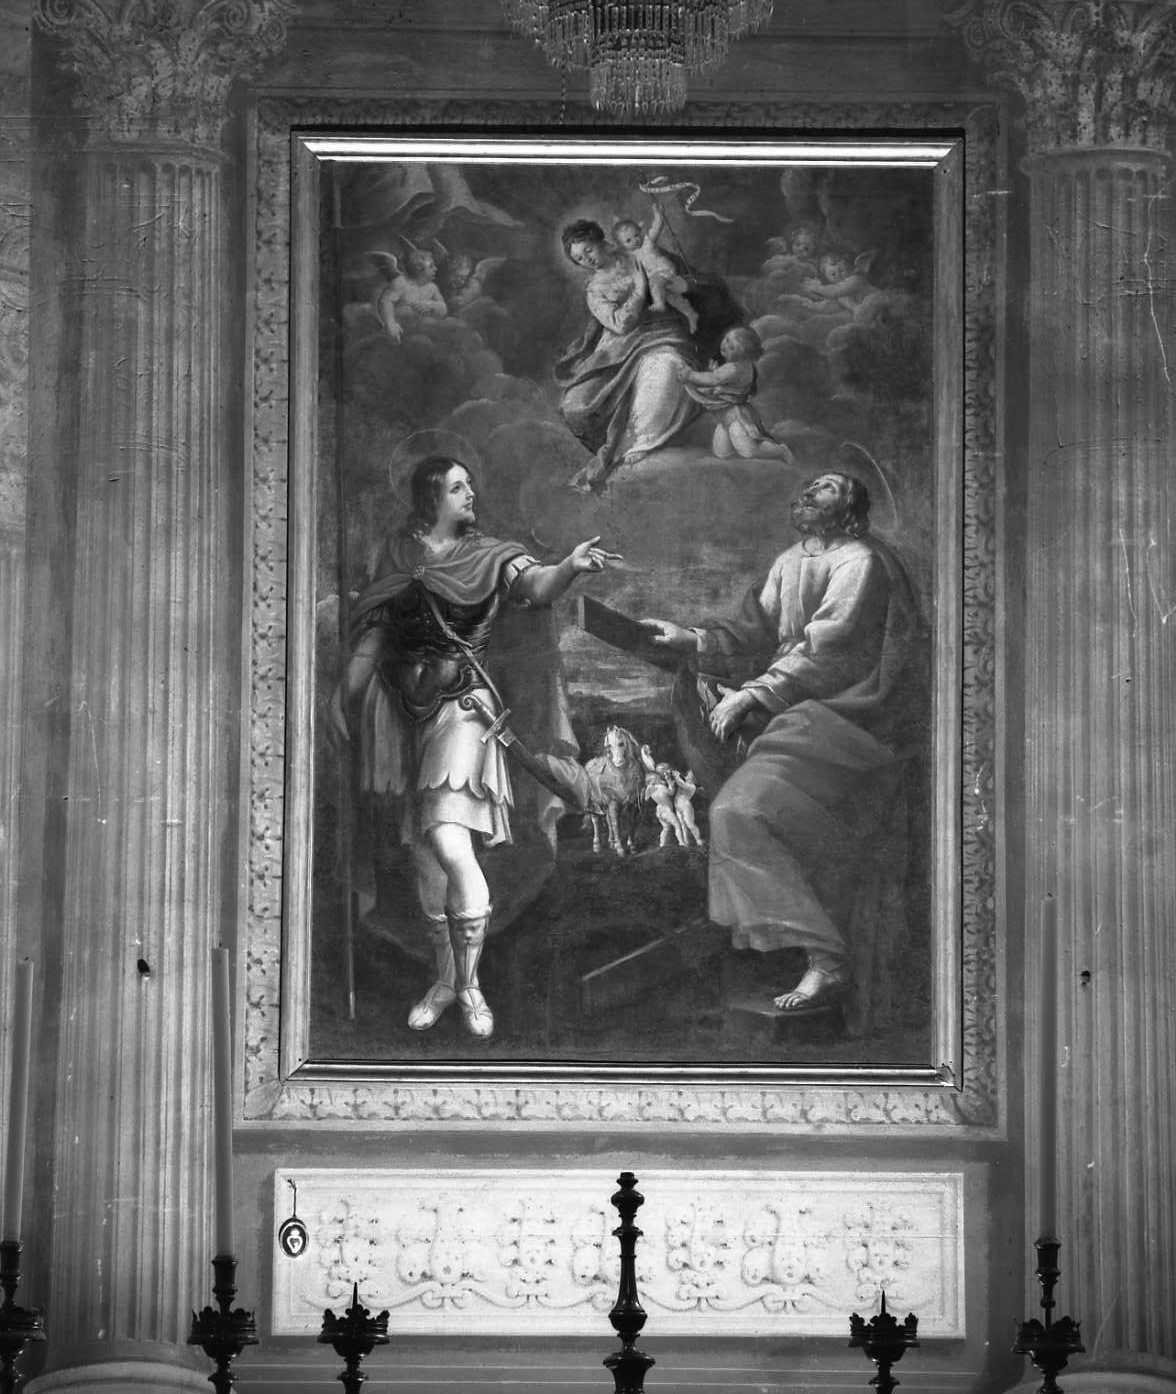 An image of the Virgin Mary and Infant Jesus, with the Infant Saint John the Baptist at her feet, enthroned in the clouds. Below them, Jesus and Saint John the Baptist appear as adults, with Jesus looking up at the clouds above. The painting is set in a frame between two columns, as part of a larger architectural decoration for a church. 